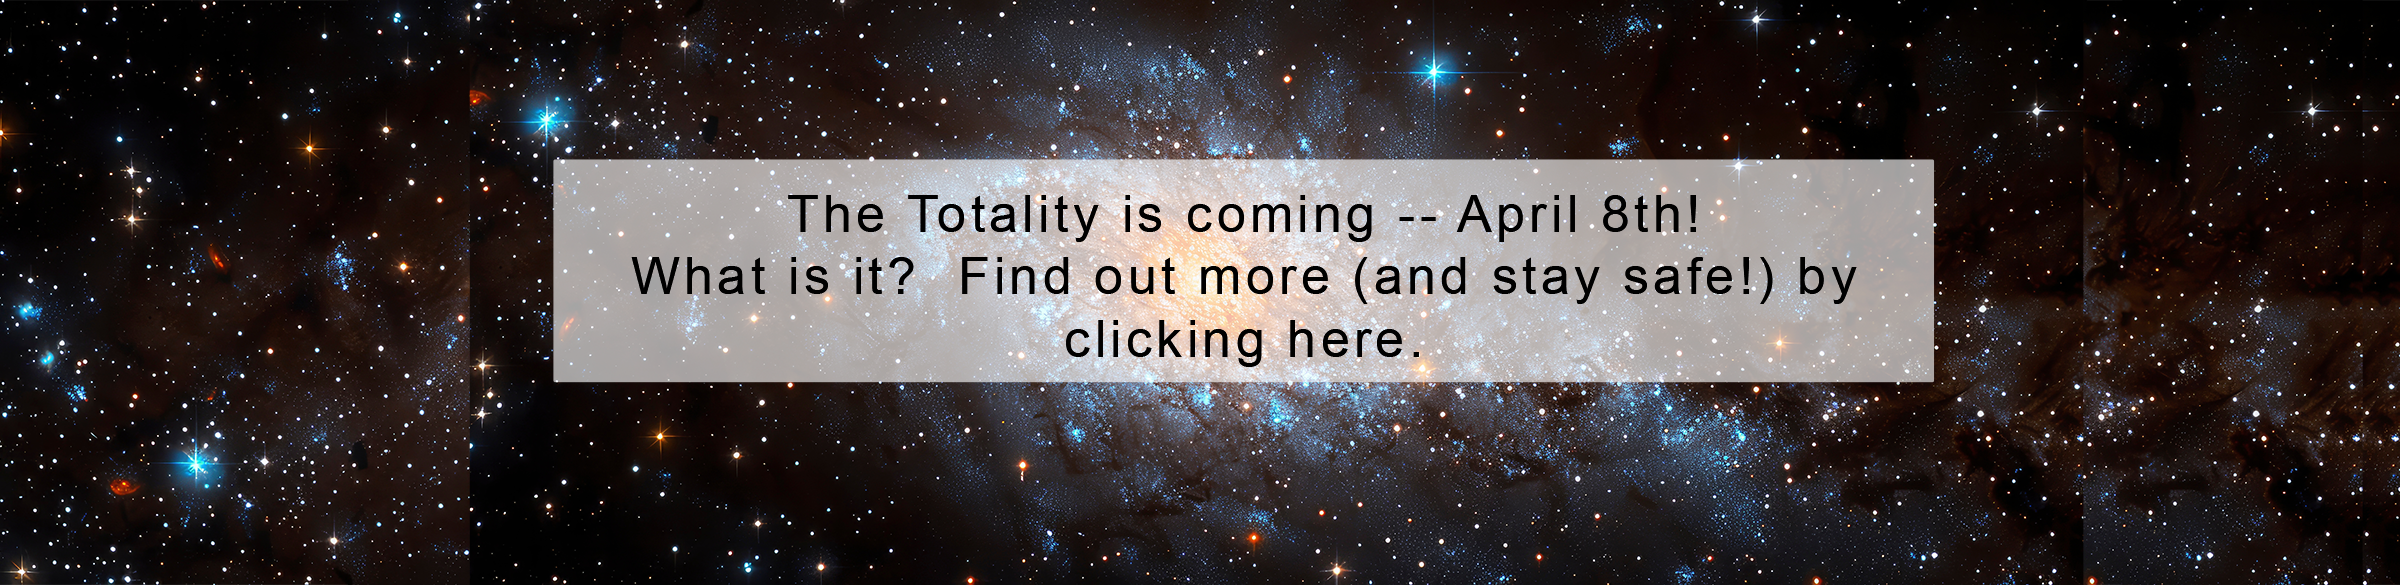 Banner image of outer space.  With the following text: "The Totality is coming -- April 8th! What is it?  Find out more (and stay safe!) by  clicking here.'